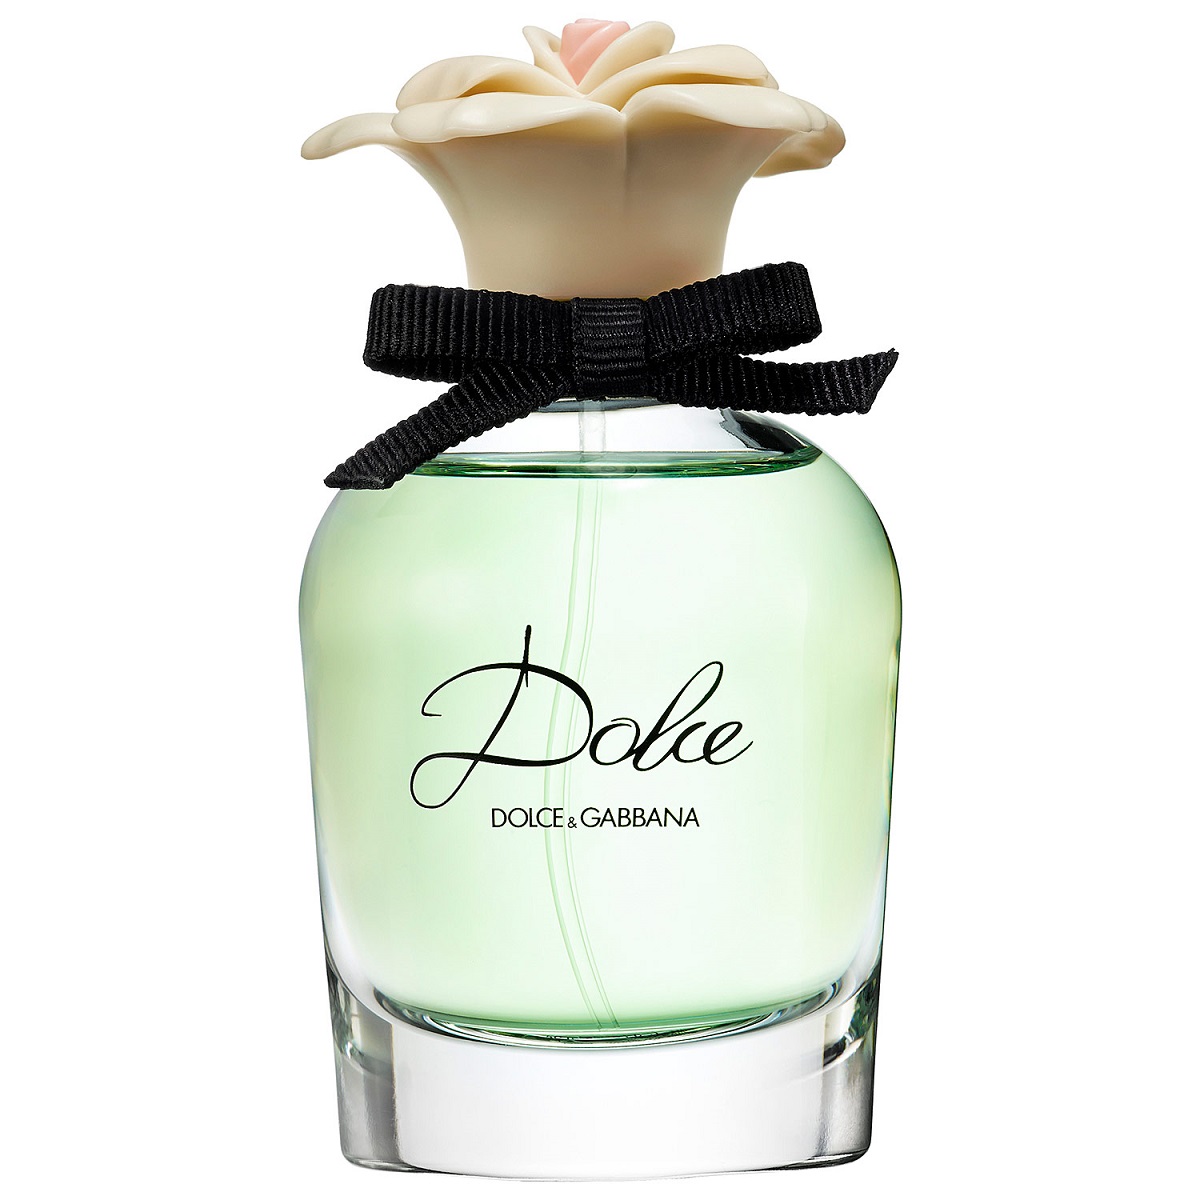 Dolce & Gabbana Dolce Floral Drops, EDT., 75 ml